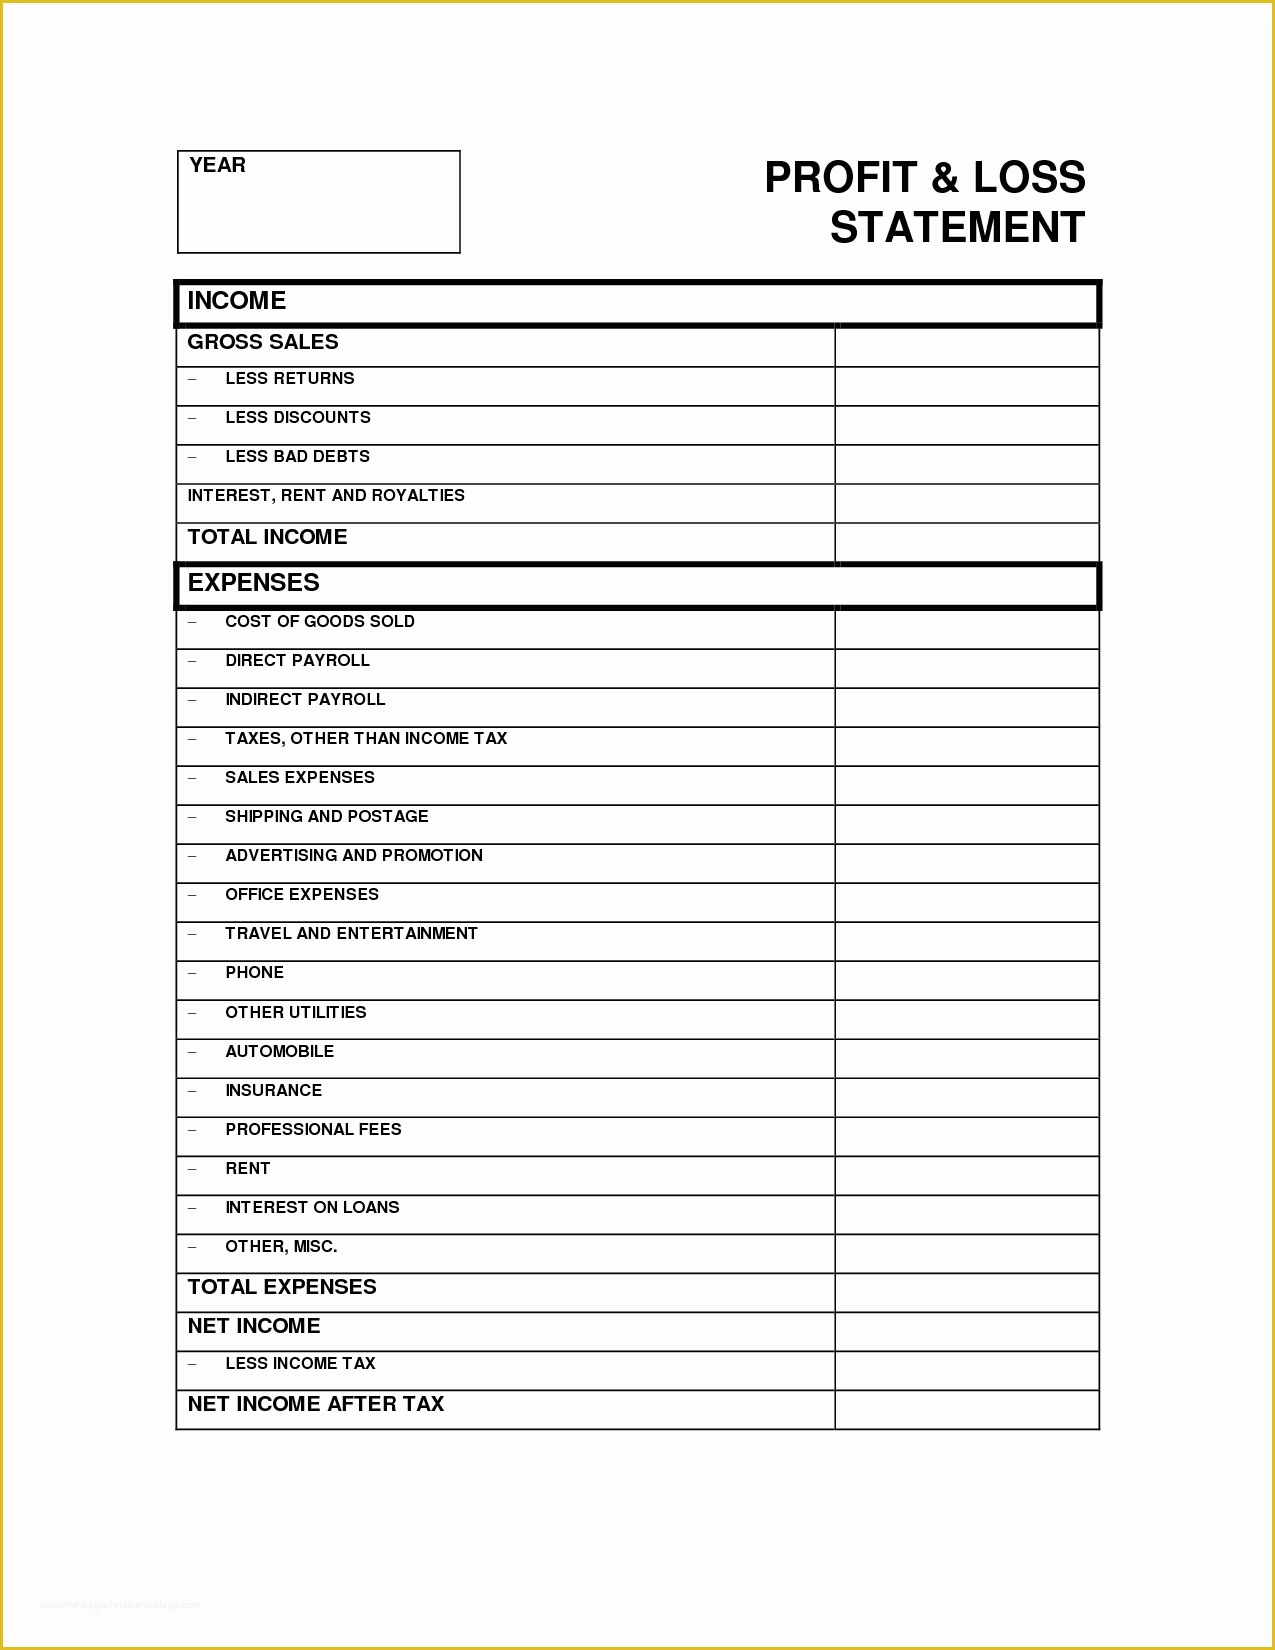 Free Simple Profit and Loss Template for Self Employed Of Profit and Loss Statement for Self Employed Profit and